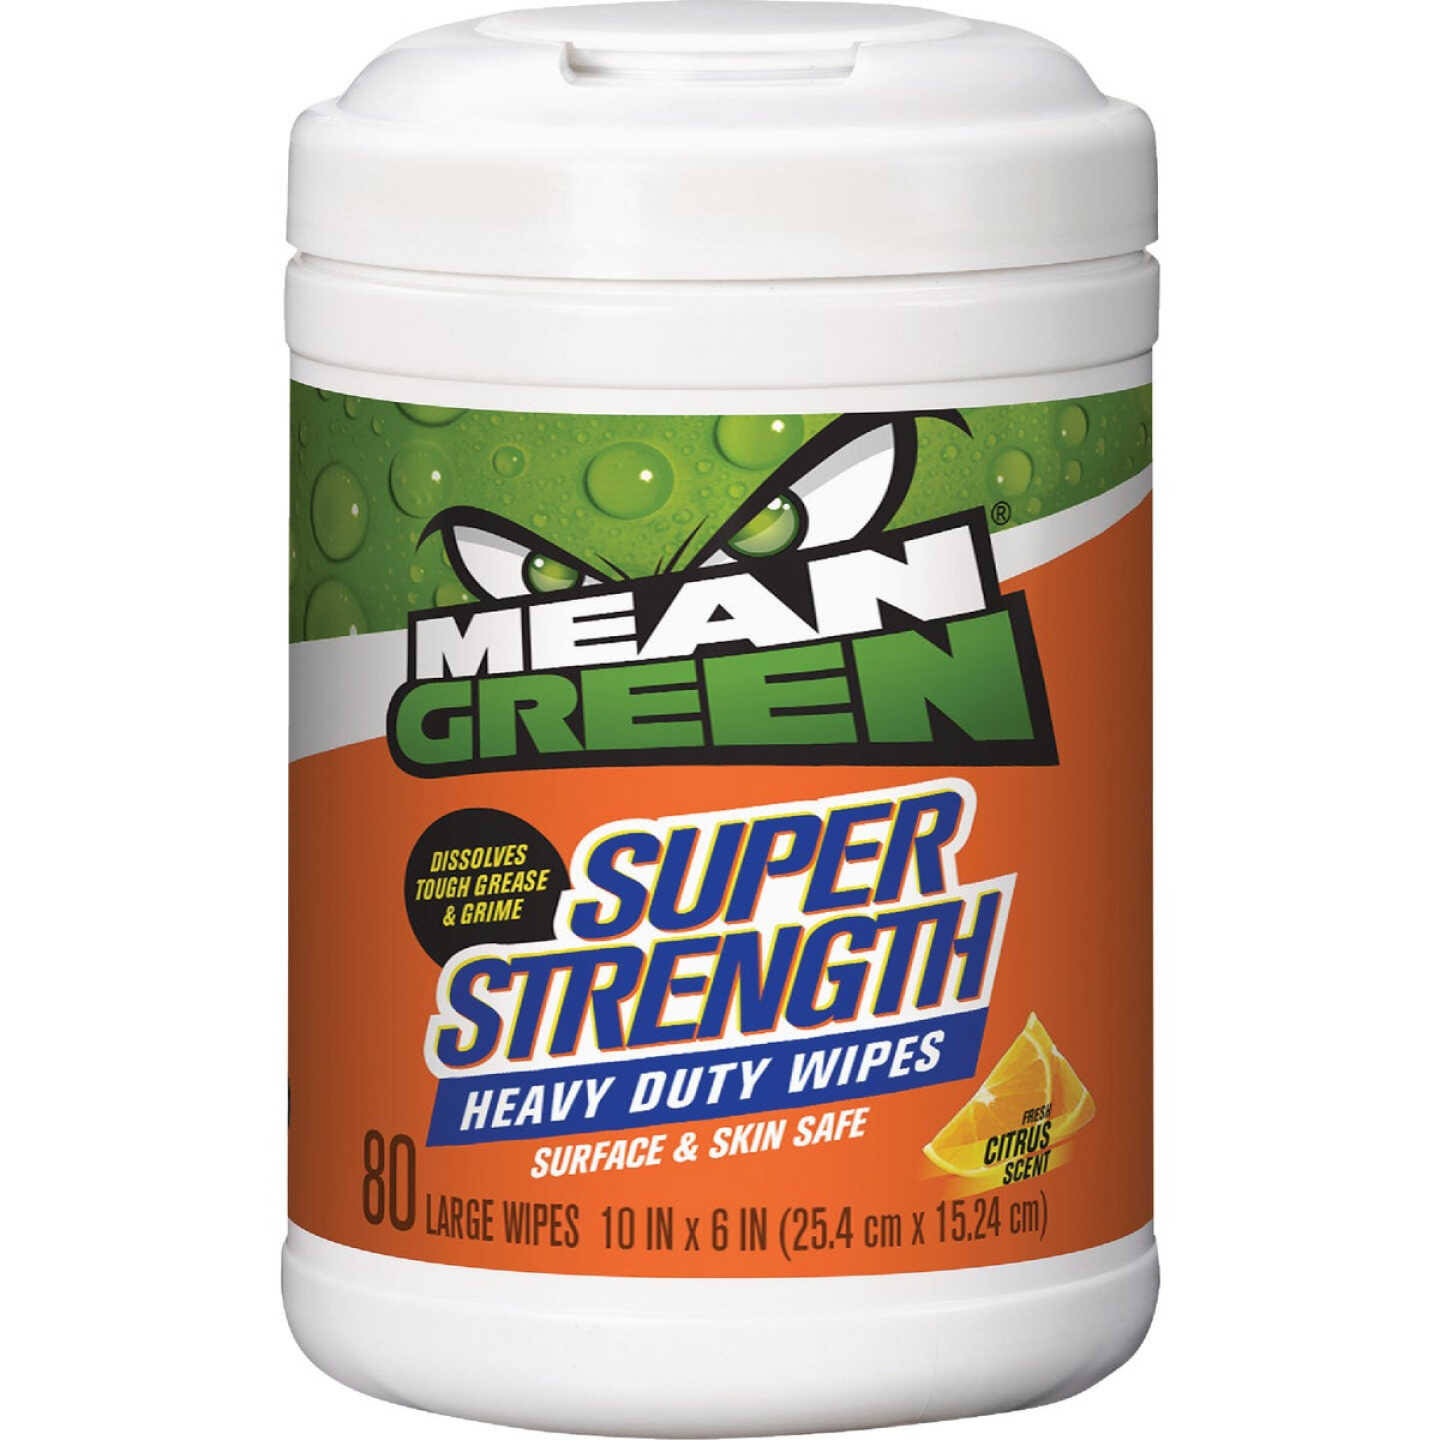 Mean Green Super Strength Series Heavy-Duty Cleaning Wipes 10 in L 6 in W Fresh Citrus - pack of 80 73157